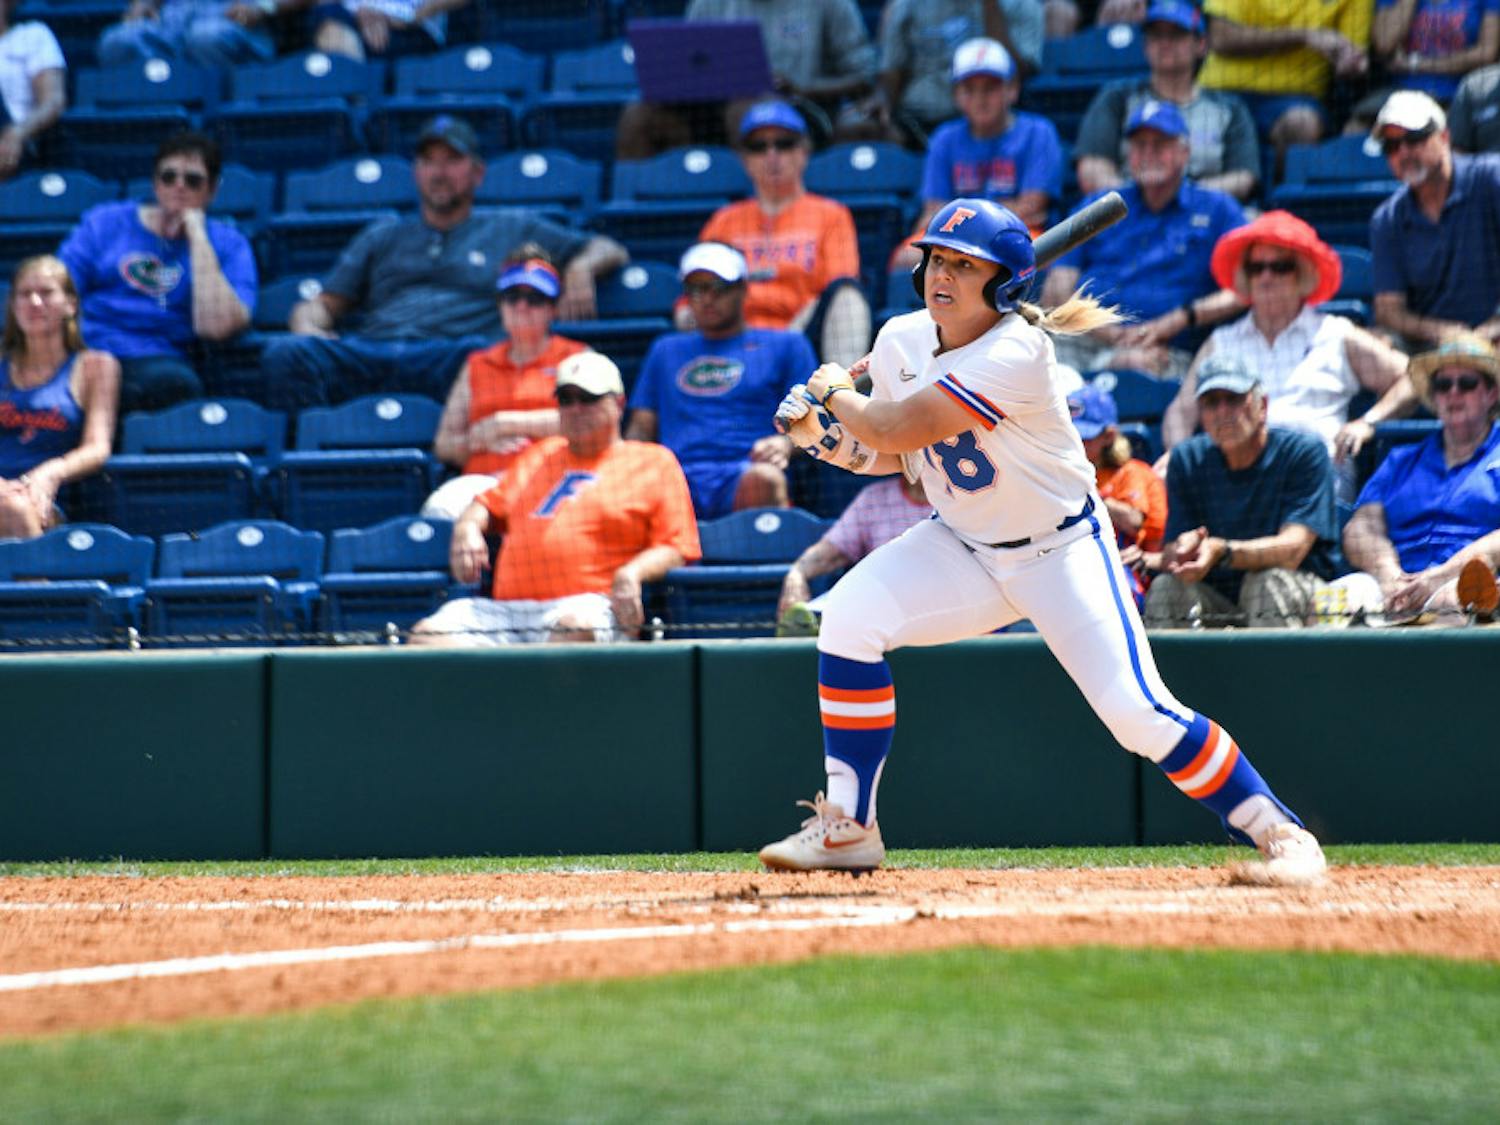 The Gators edged past Alabama to win their second-straight SEC Tournament championship behind Kelly Barnhill's brilliant outing and Amanda Lorenz's two-RBI double.